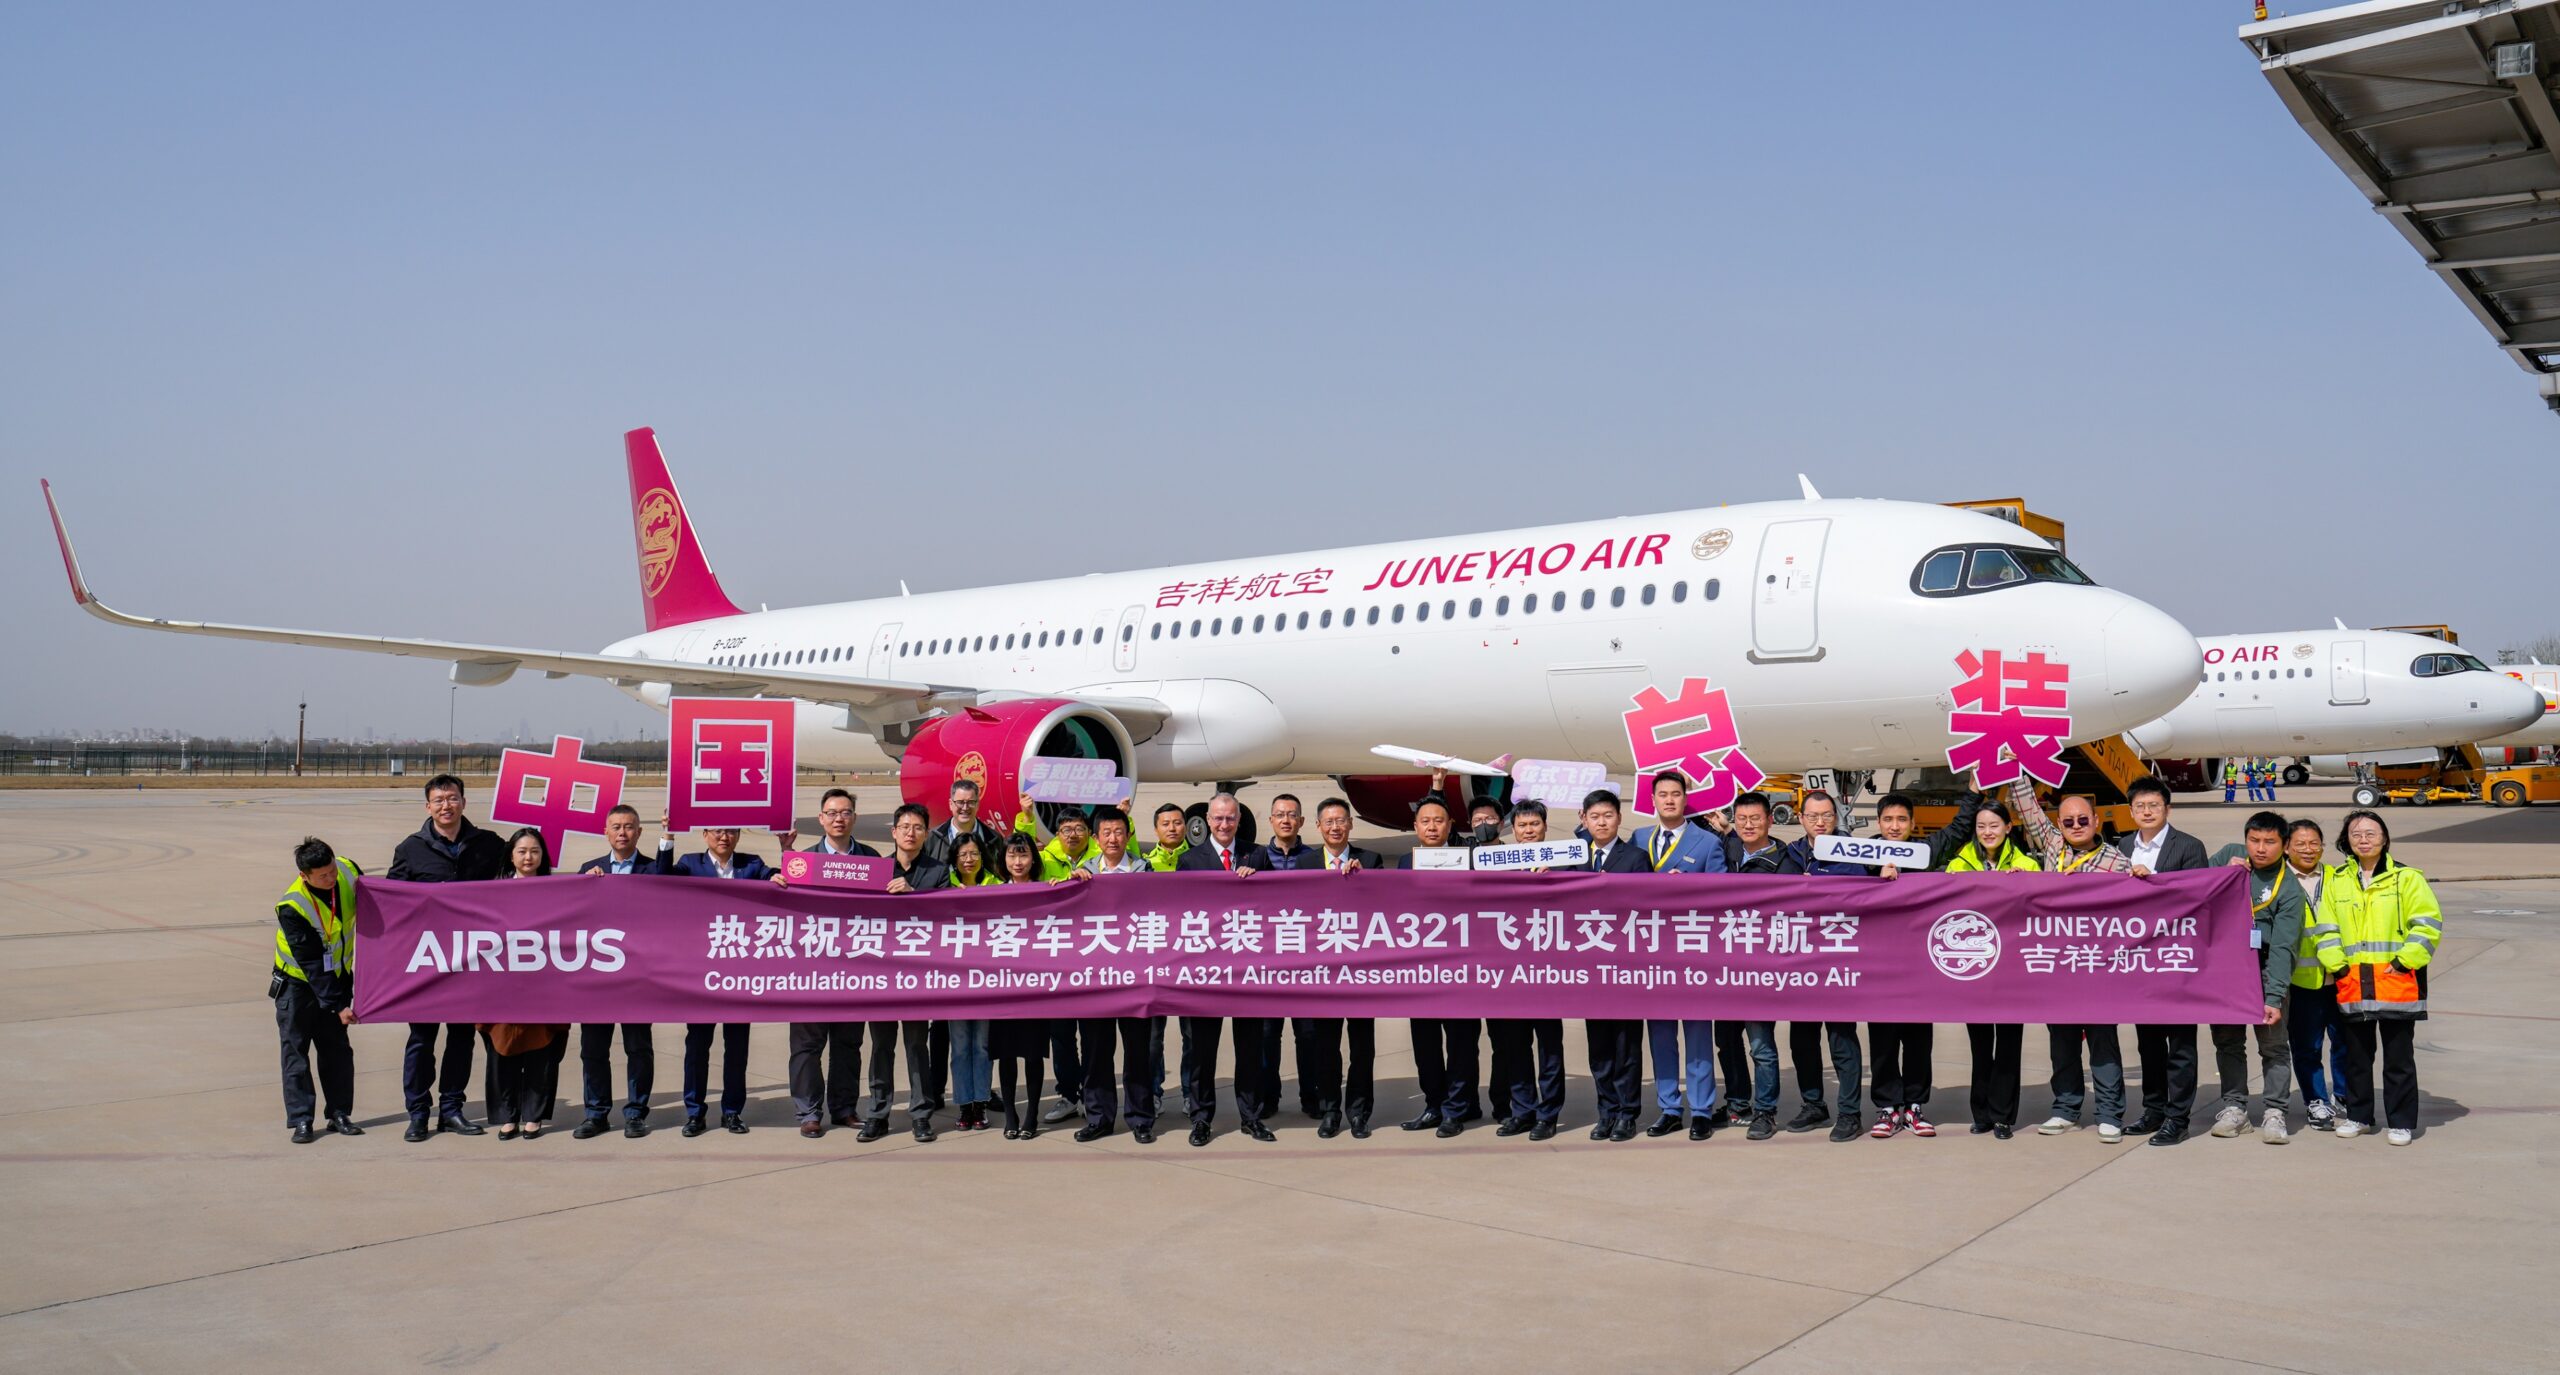 Airbus' Tianjin Factory Delivers First Aircraft